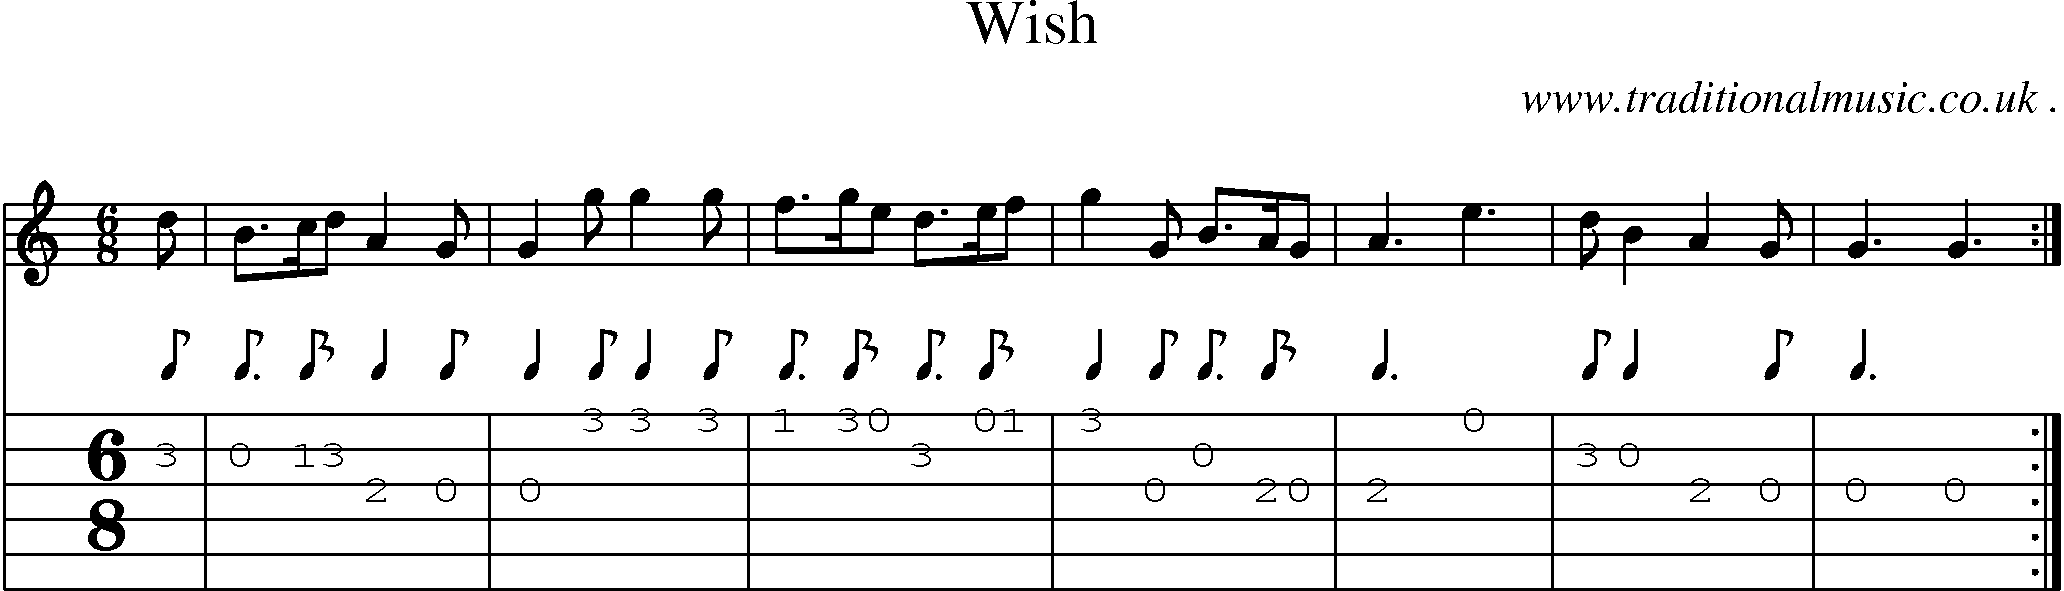 Sheet-Music and Guitar Tabs for Wish